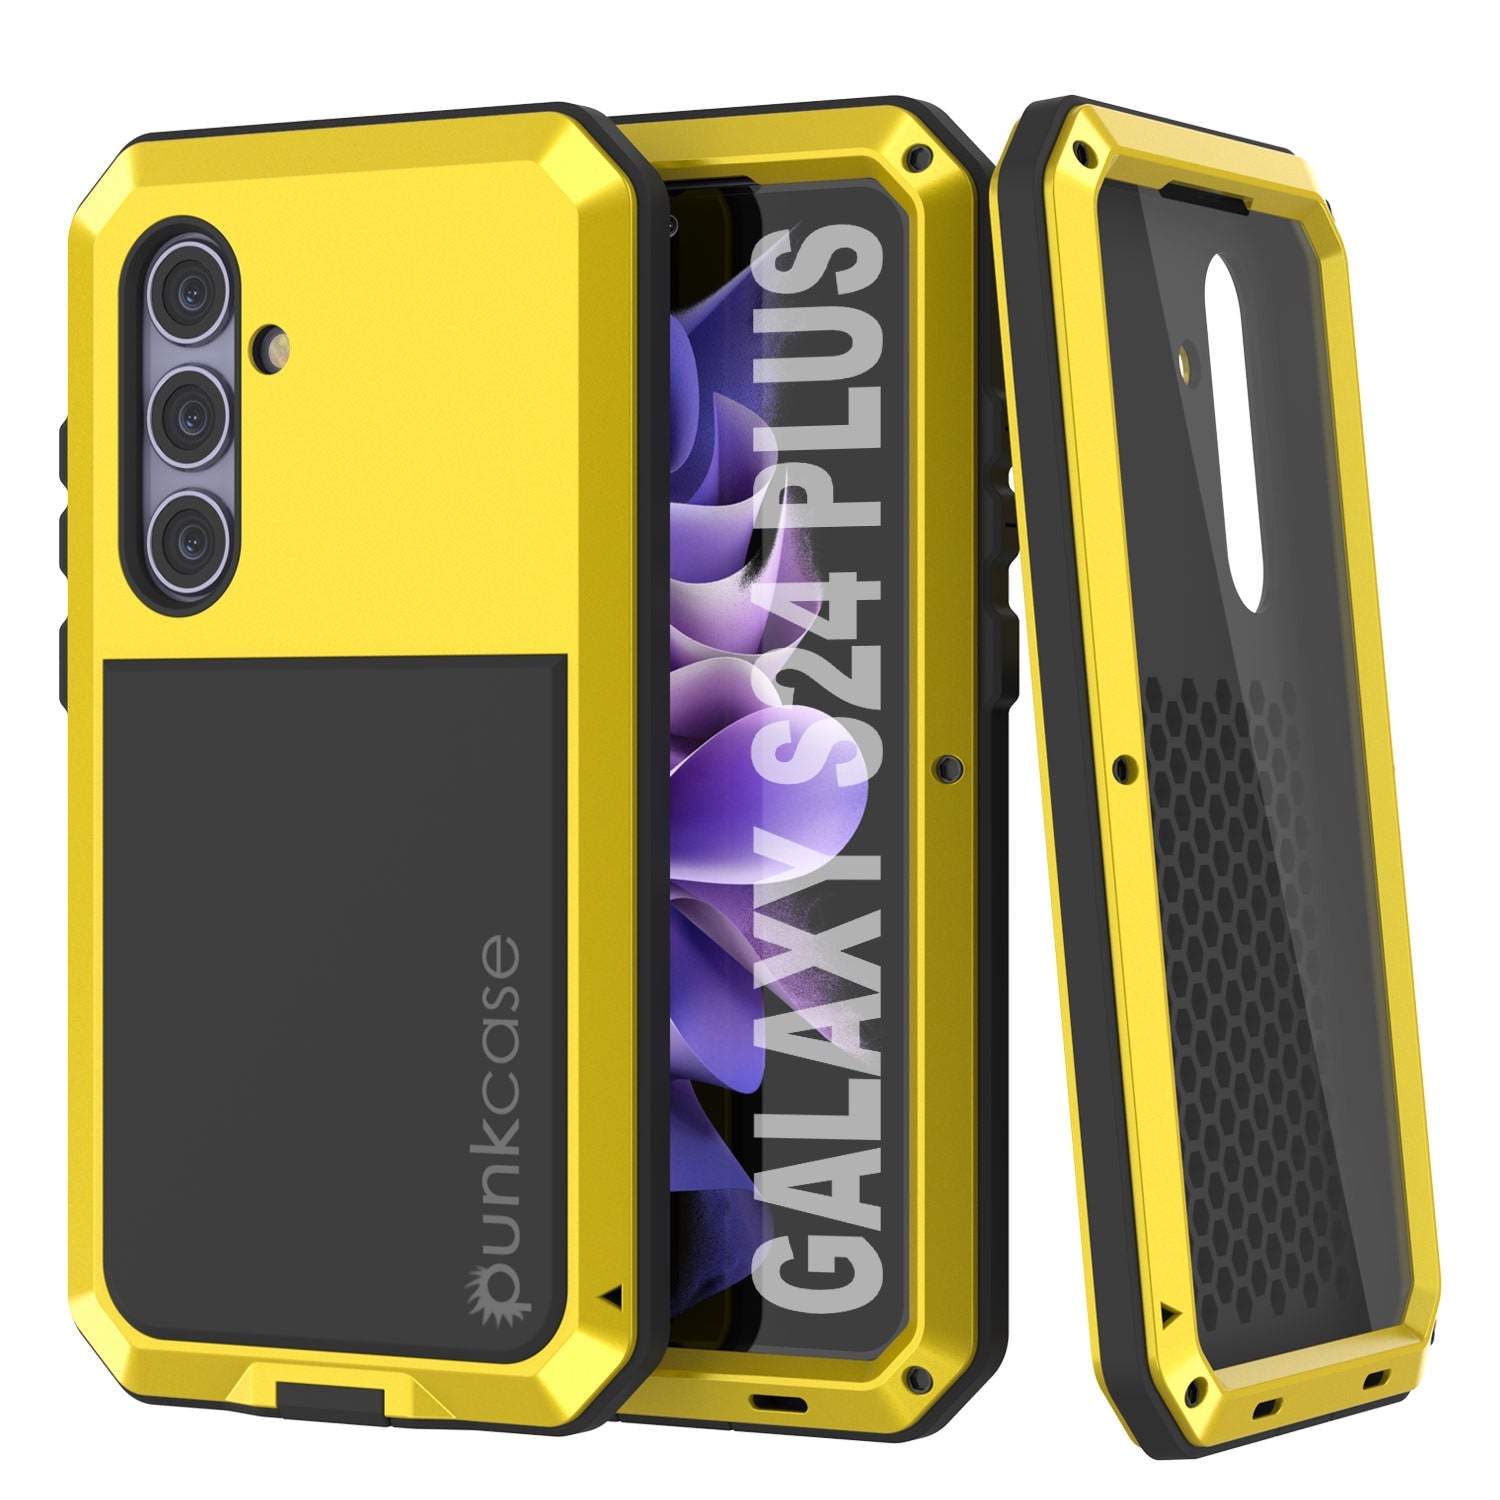 Galaxy S24 Plus Metal Case, Heavy Duty Military Grade Armor Cover [shock proof] Full Body Hard [Yellow]